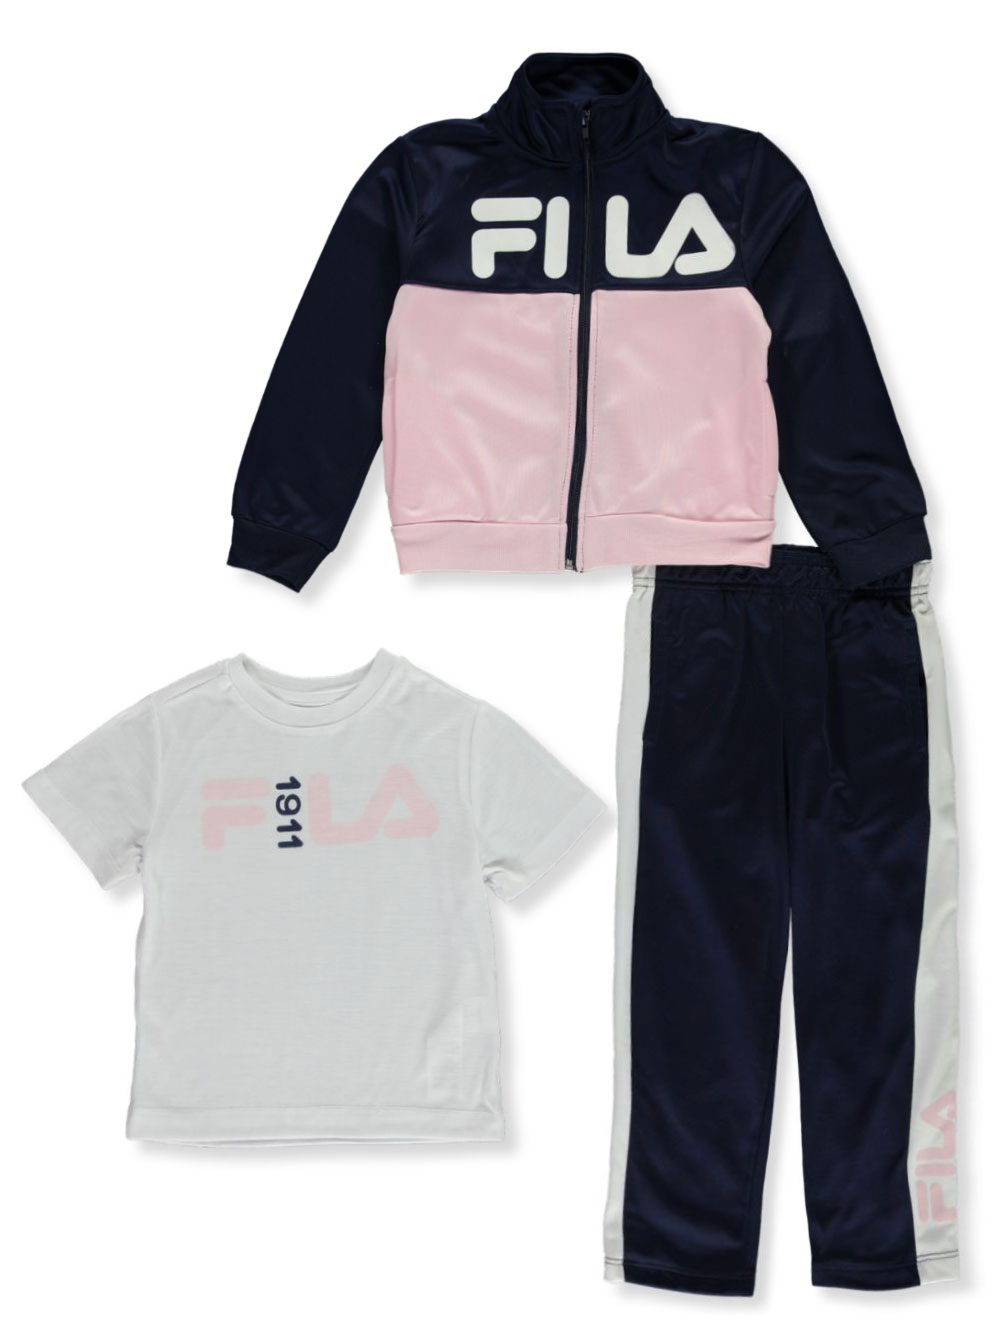 fila clothes for girls